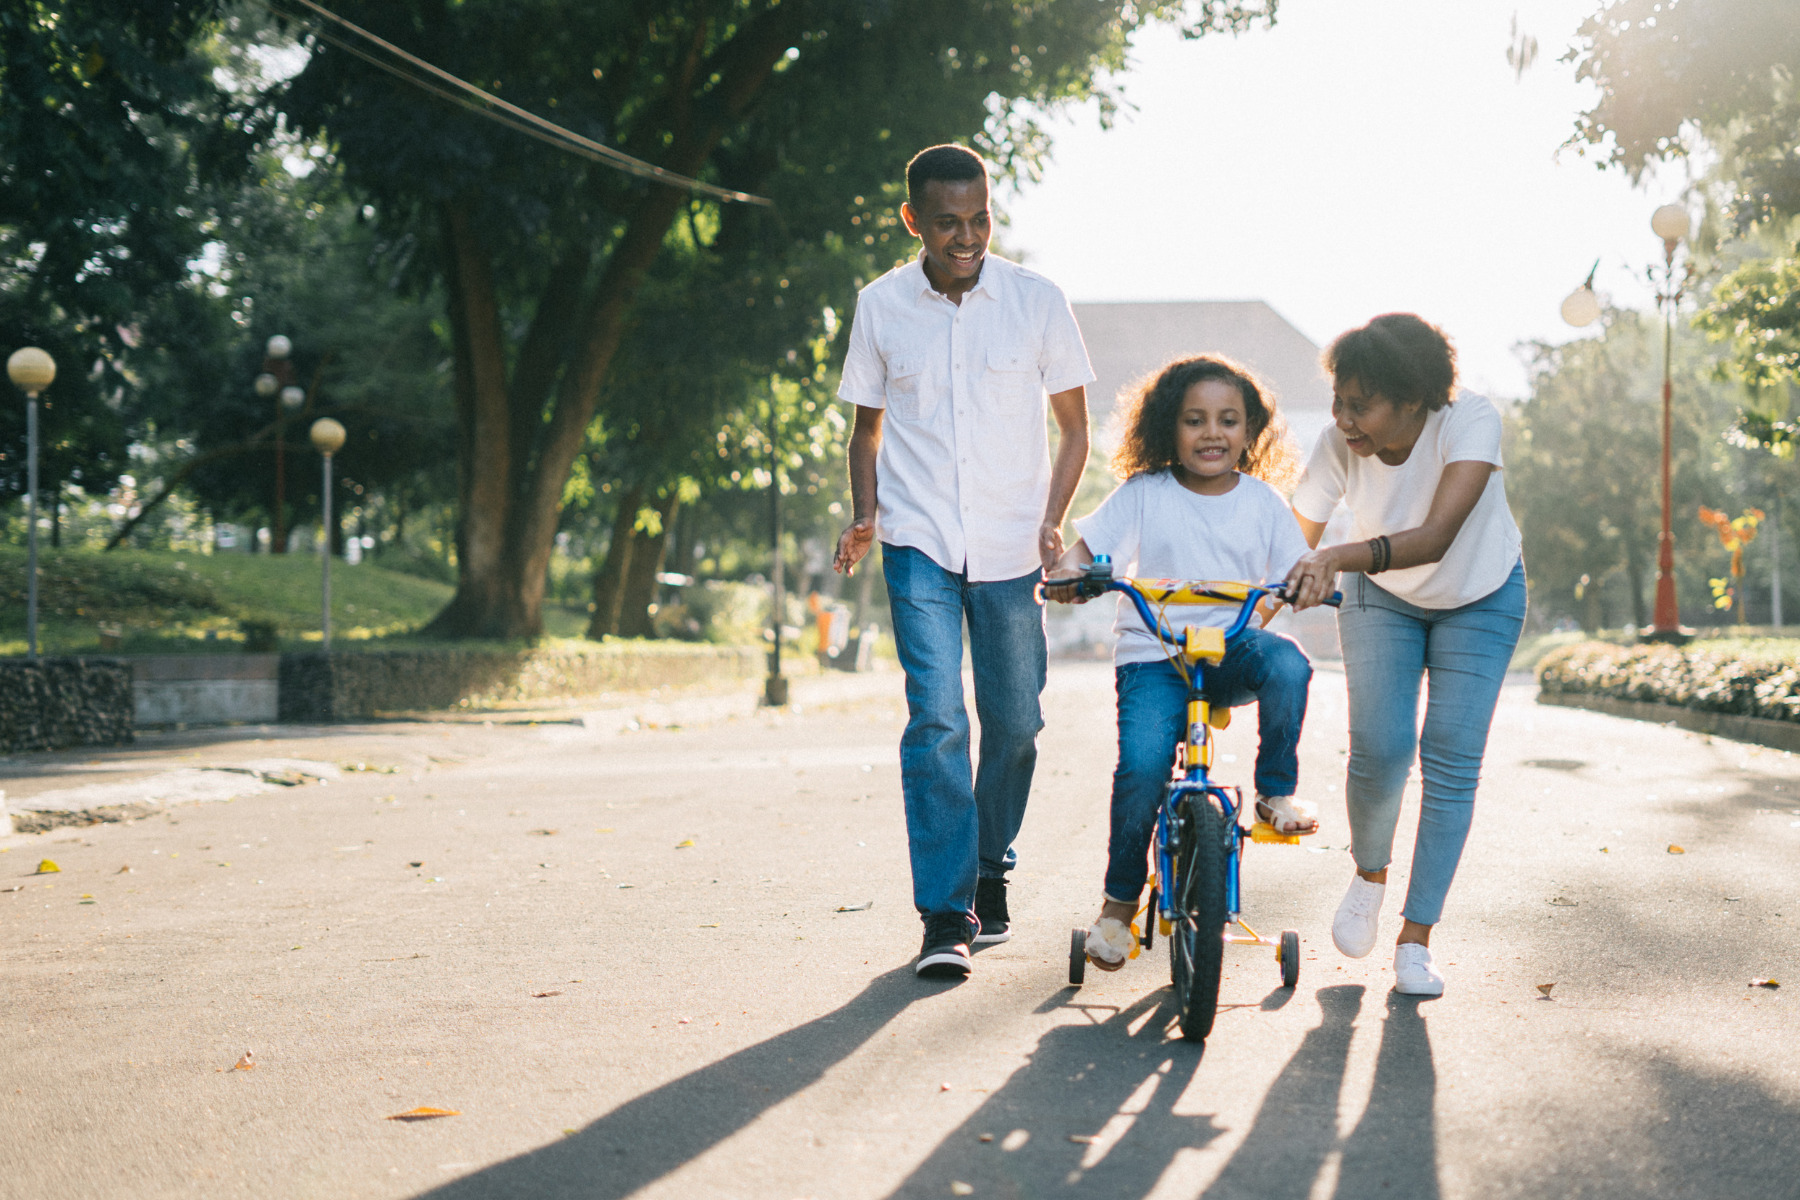 Learn how family counseling can help with improving communication, dealing with conflict, and building joy in a household.